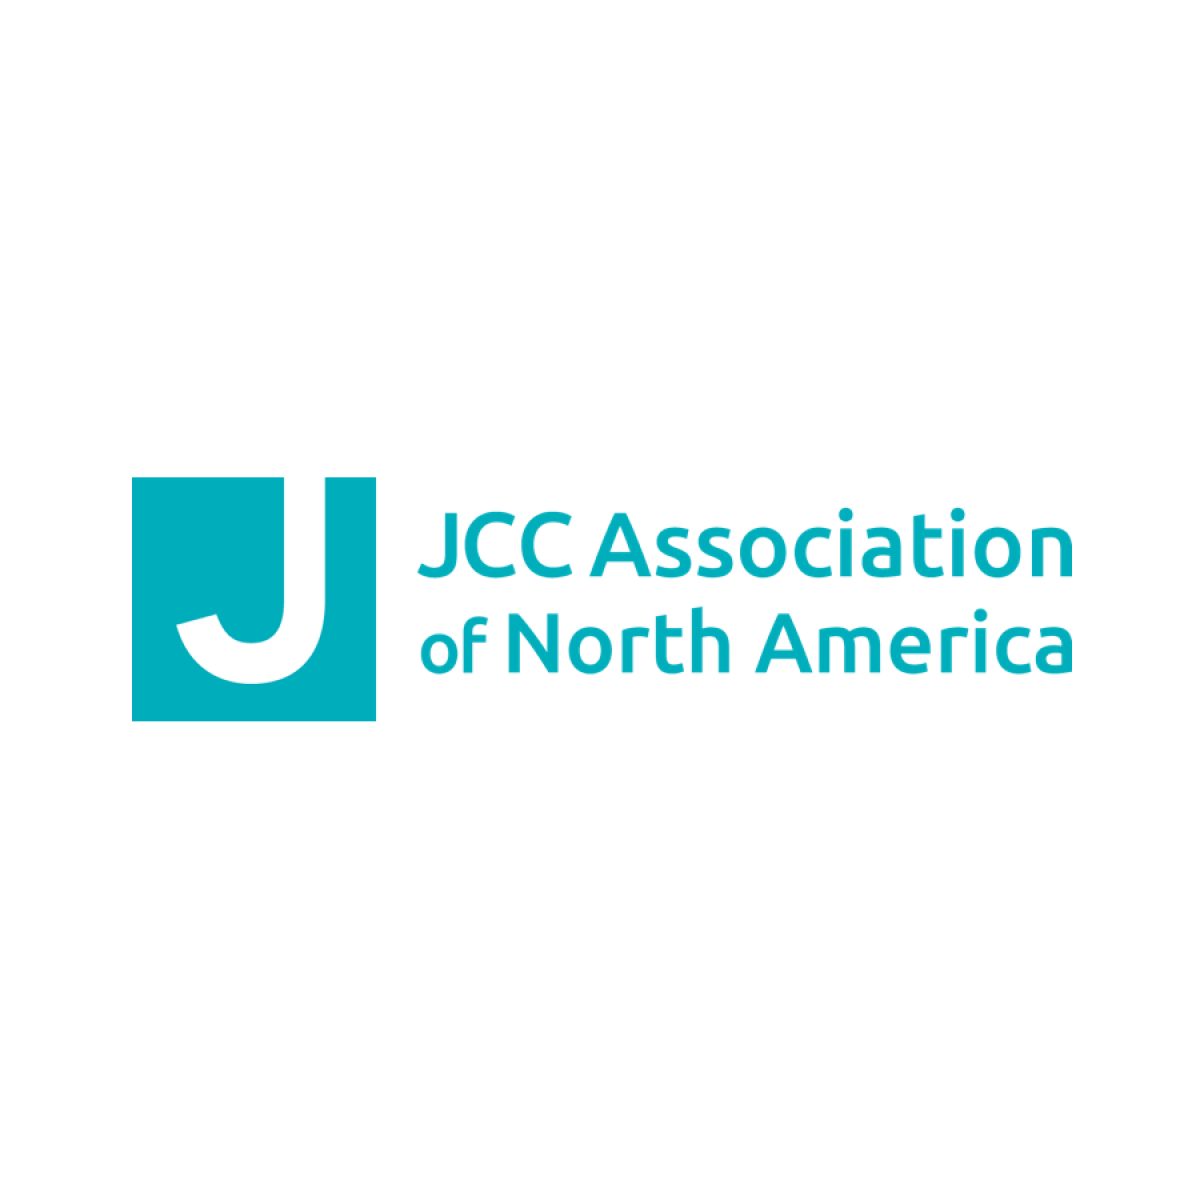 The Center for Arts and Culture at JCC Association